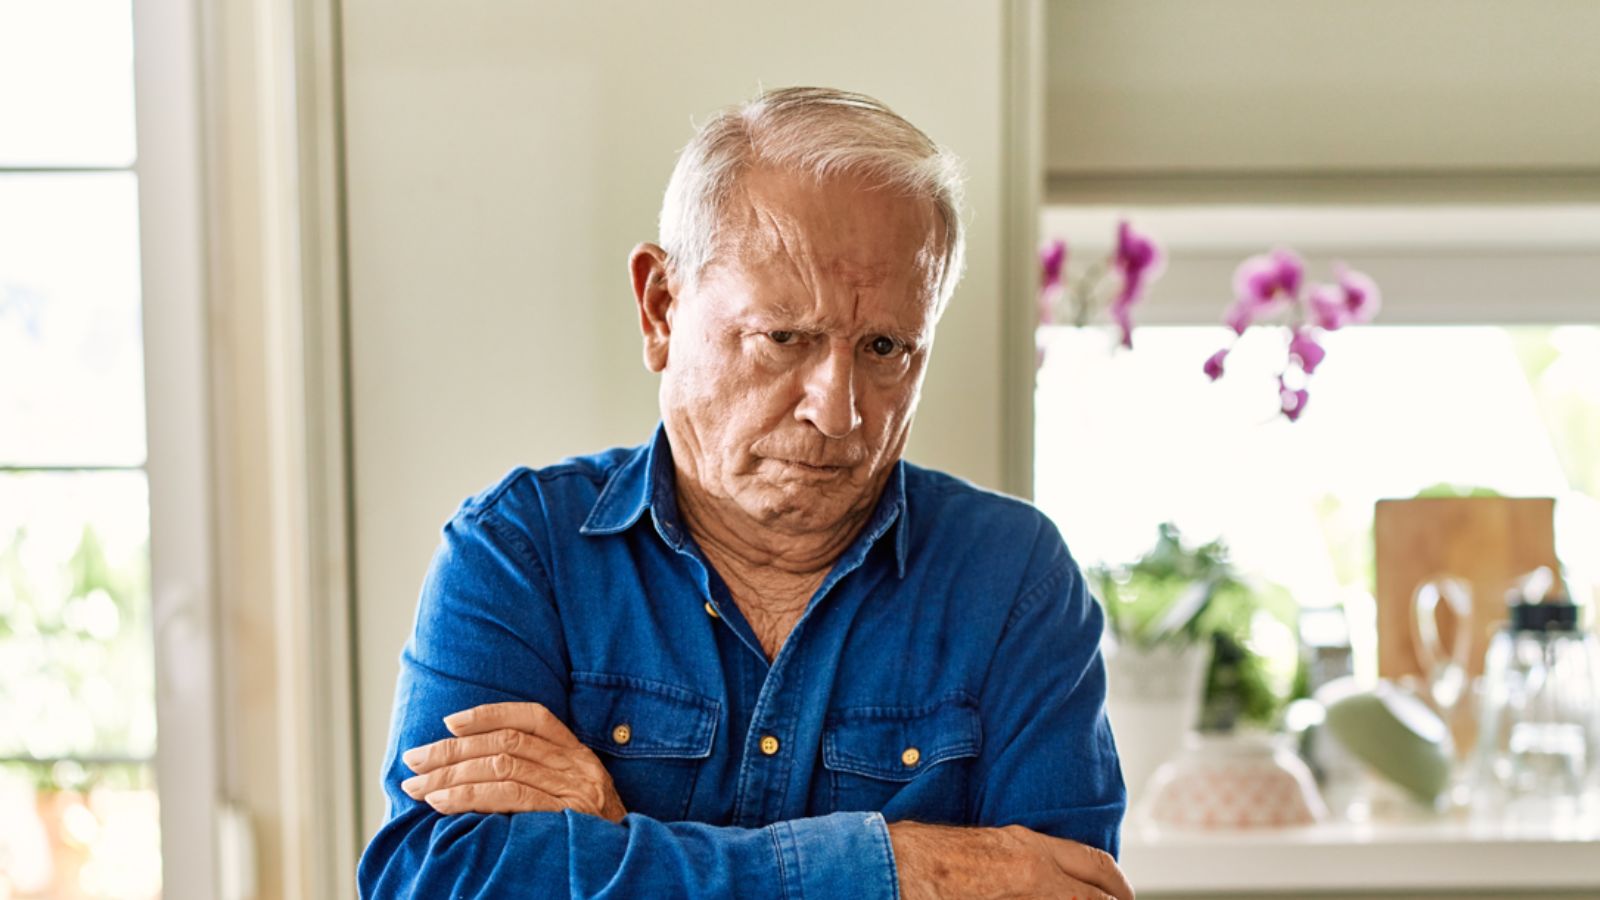 <p>You might read this and be able to relate, or you may feel you’ve become grumpier the older you’ve gotten. Or maybe you know of a male friend or relative who has. Here are 18 reasons why men get grumpier as they age.</p><p><a href="https://happyfarmyard.com/18-reasons-why-men-get-grumpier-as-they-age/"><strong>18 Reasons Why Men Get Grumpier As They Age</strong></a></p>